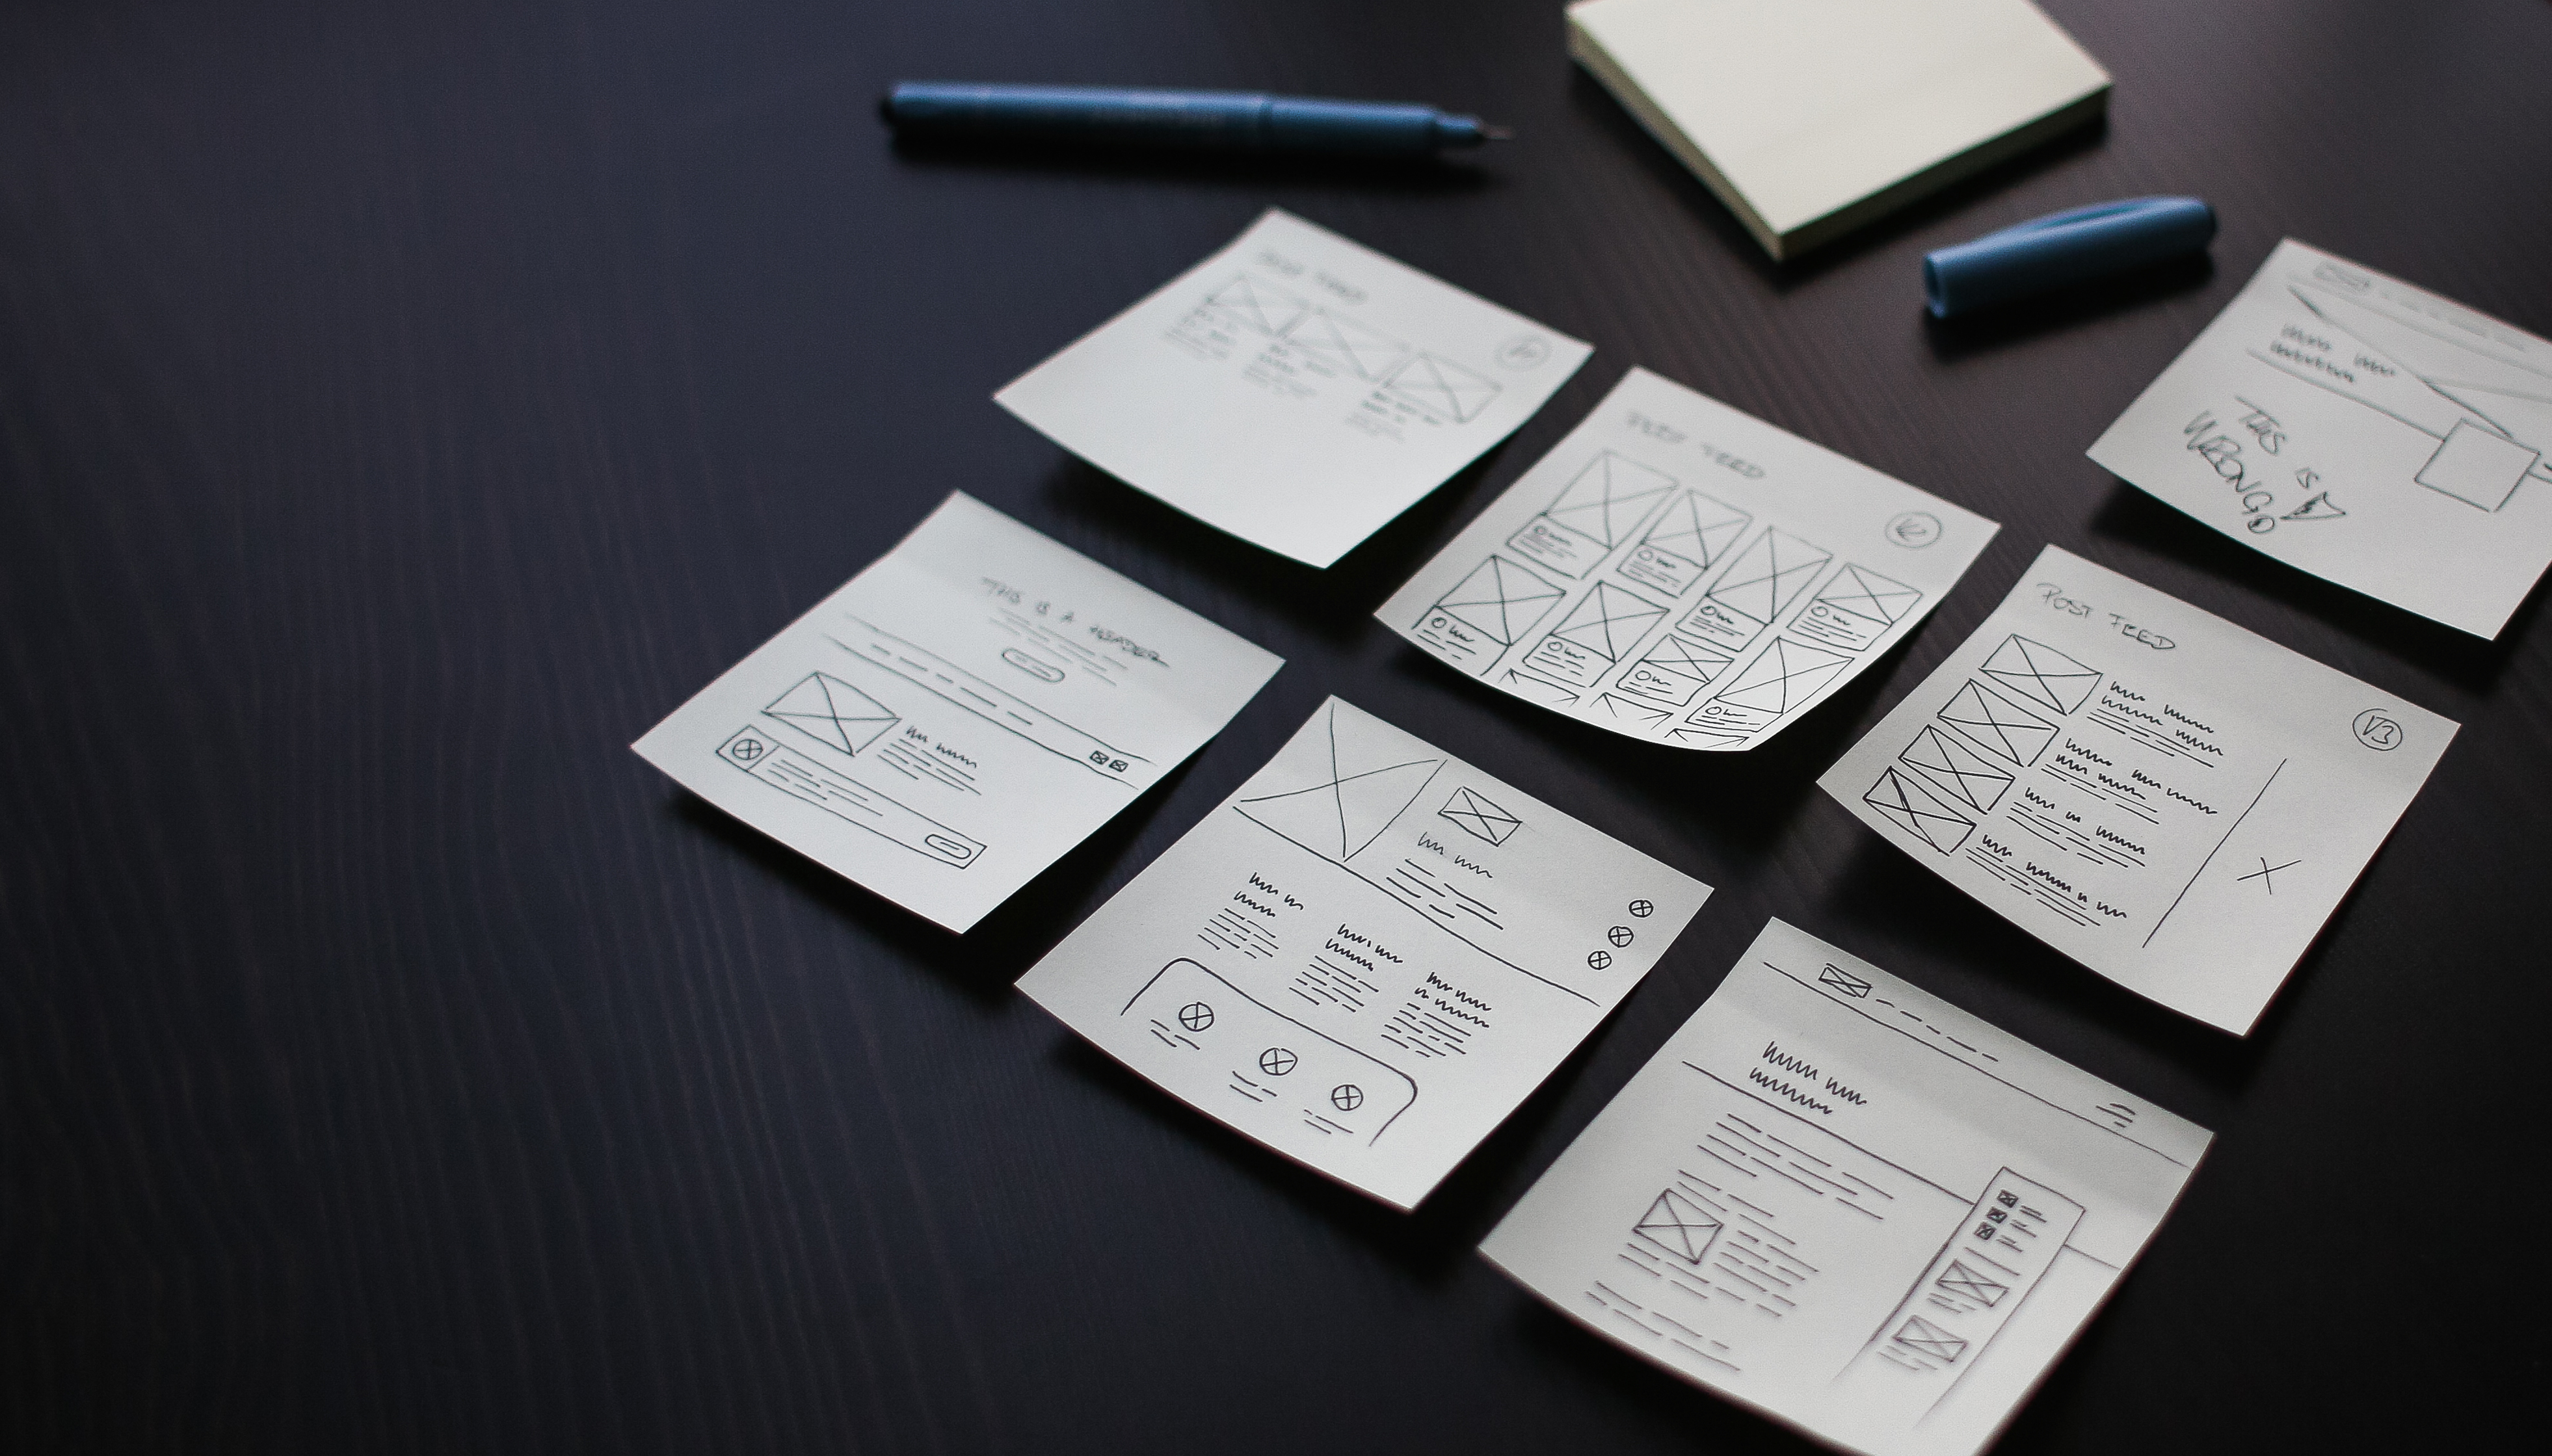 Low-Tech Wireframing